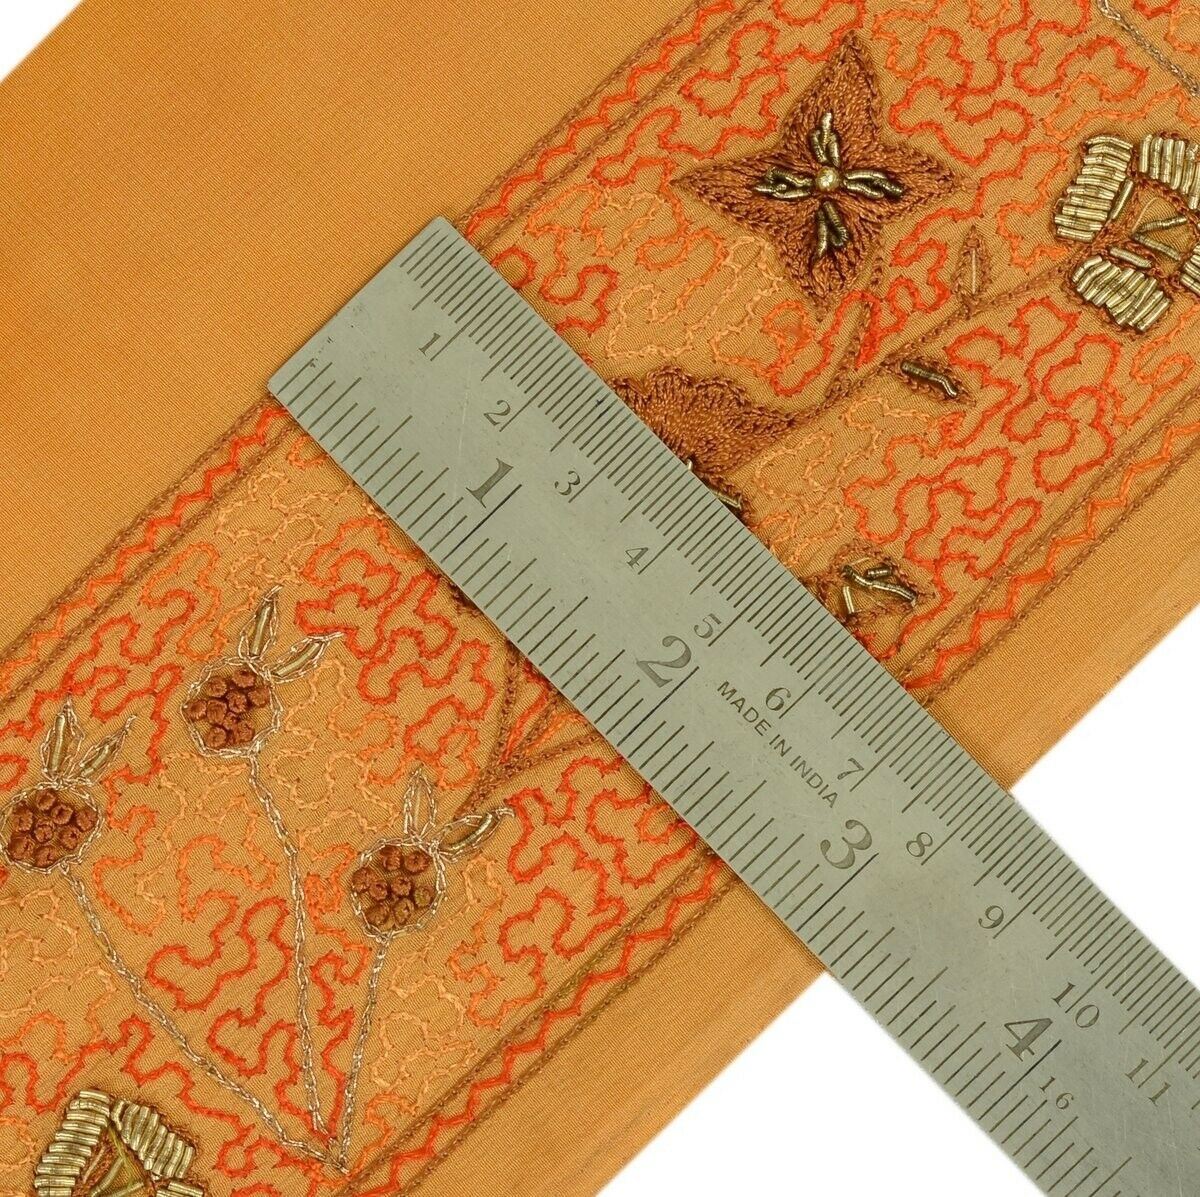 Vintage Sari Border Indian Craft Trim Hand Beaded Embroidered Ribbon Lace Peach